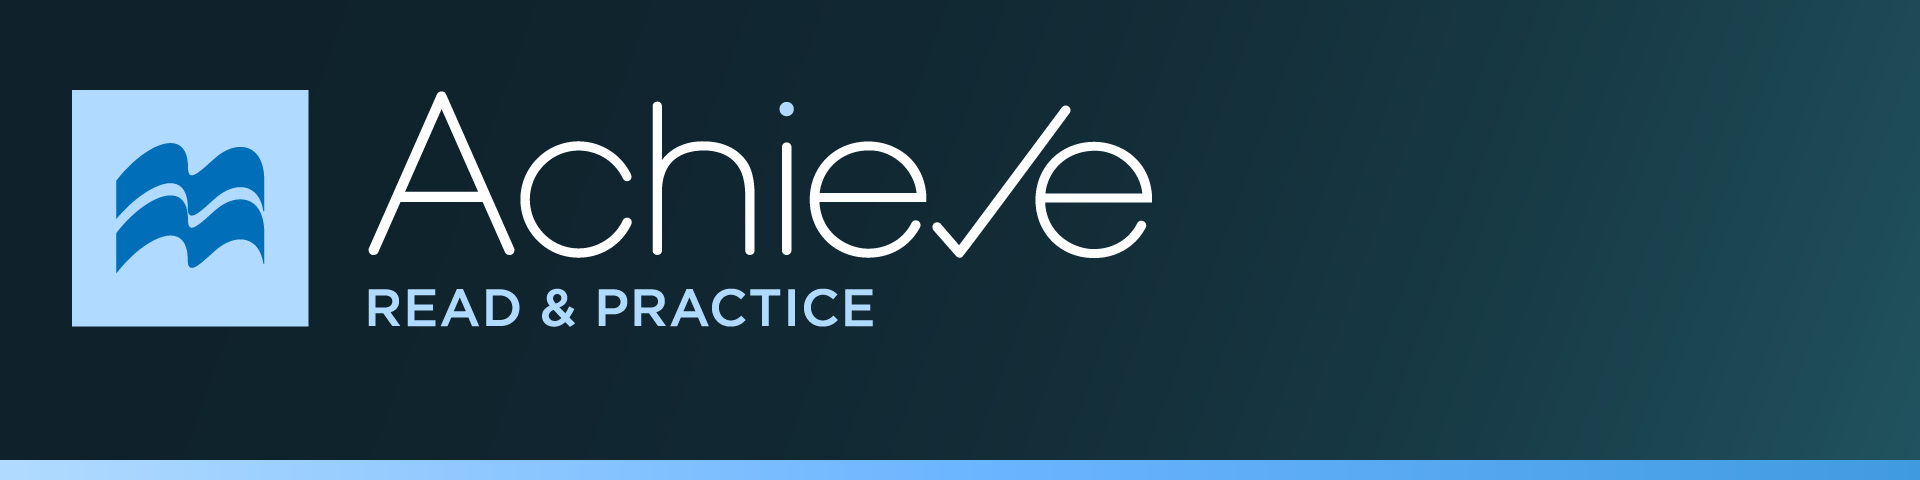 Achieve Read Practice Banner.png